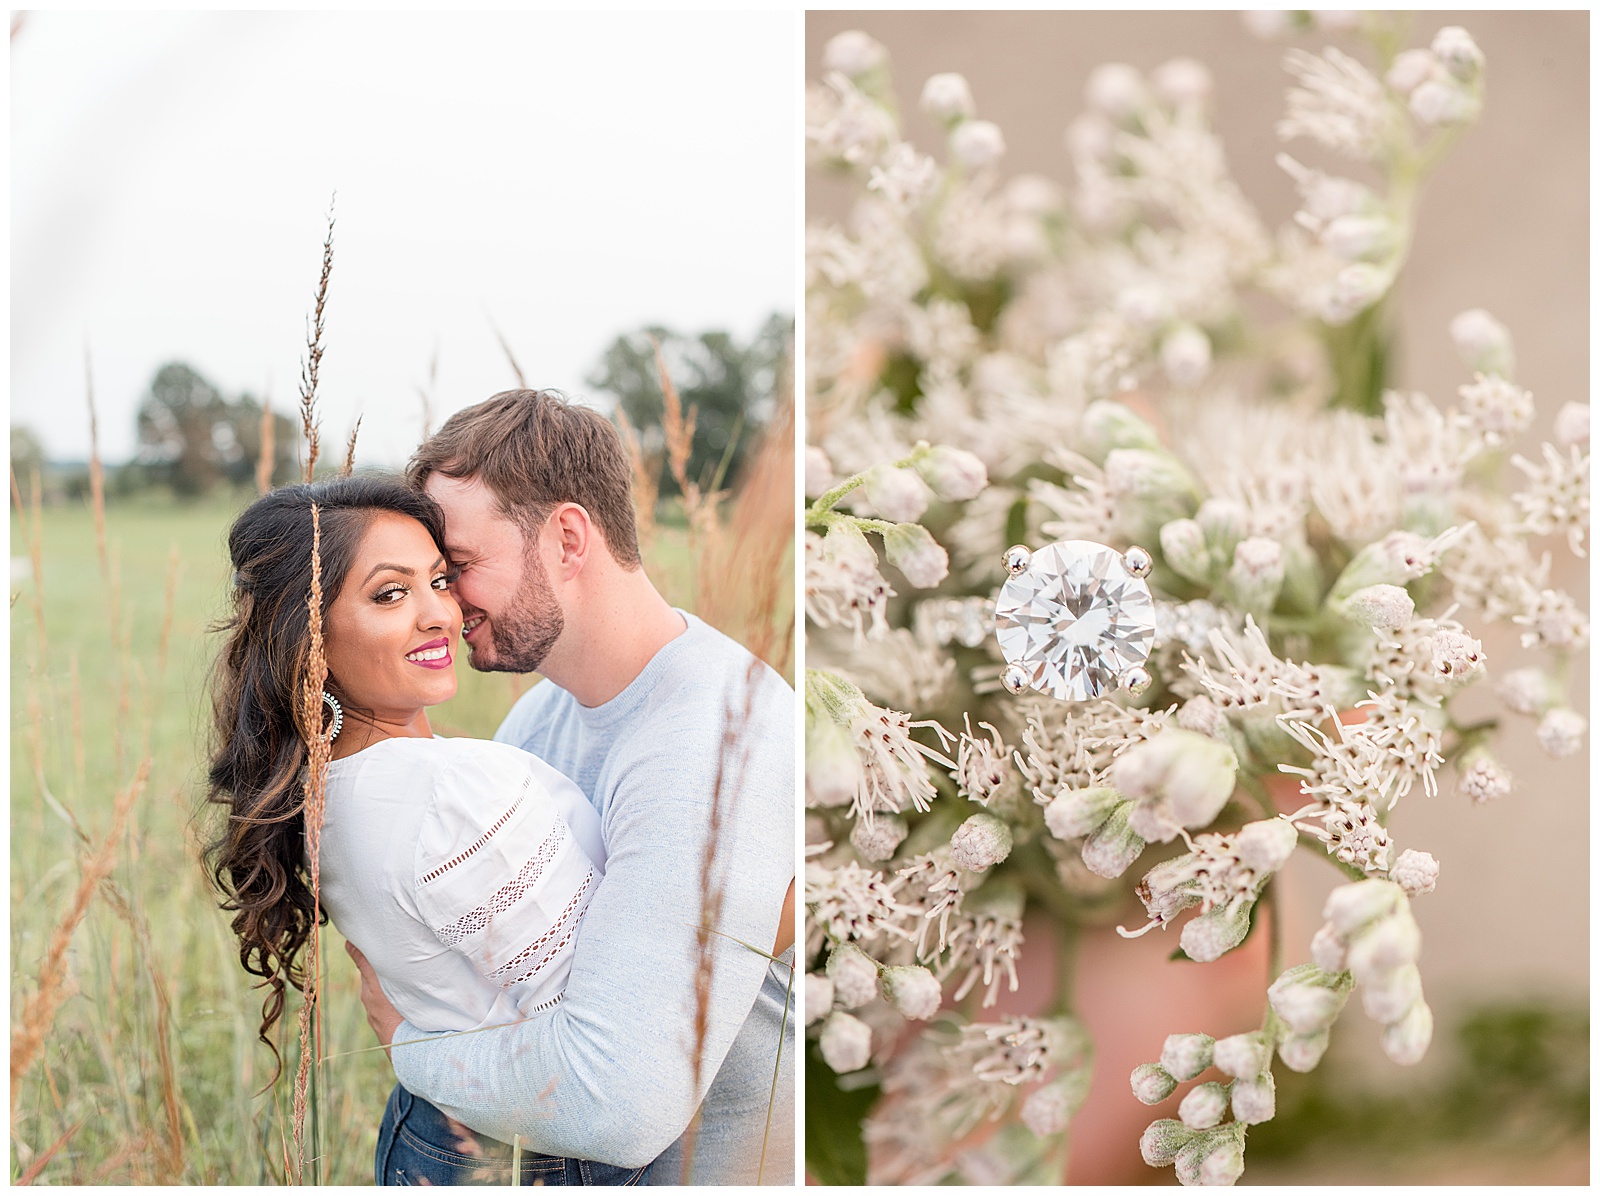 close up photo of couple is tall wild grasses with the girl on the left and the guy on the right and they are on the right side of the photo hugging tightly with the girl looking over her right shoulder smiling at the camera as the guy rests his smiling facing against the side of her head and she is wearing a white shirt and jeans and he is wearing a light gray shirt and jeans on a cloudy evening at the National Memorial Arch in Valley Forge, PA, close up of girl's engagement ring surrounded by beautiful wildflowers at the National Memorial Arch in Valley Forge, PA